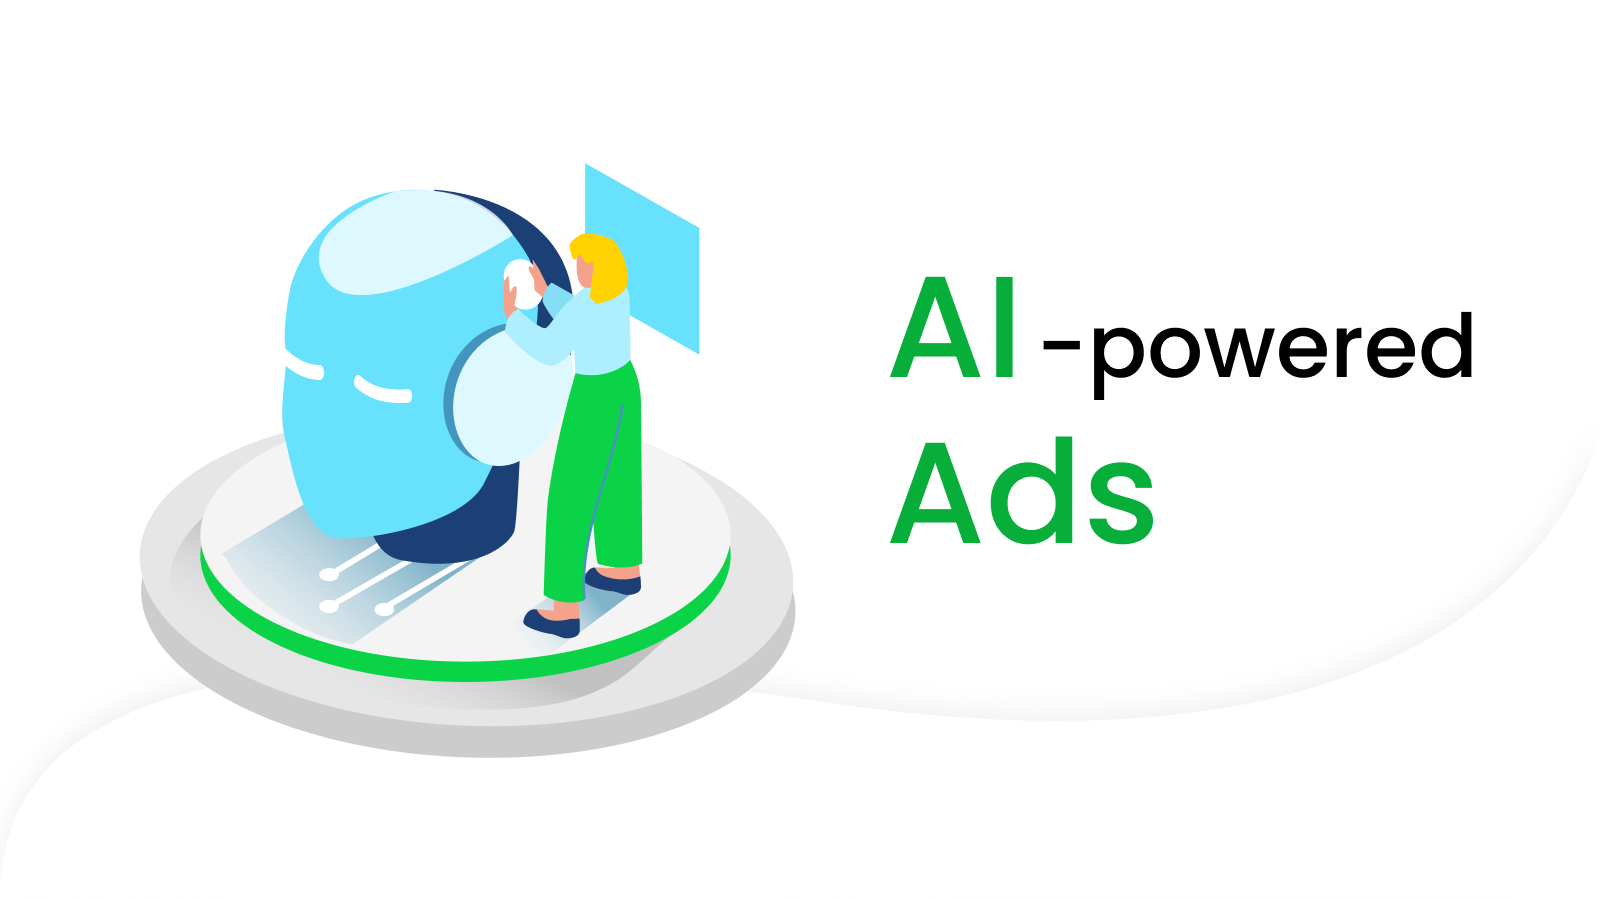 Experience the Benefits of AI-powered Ads